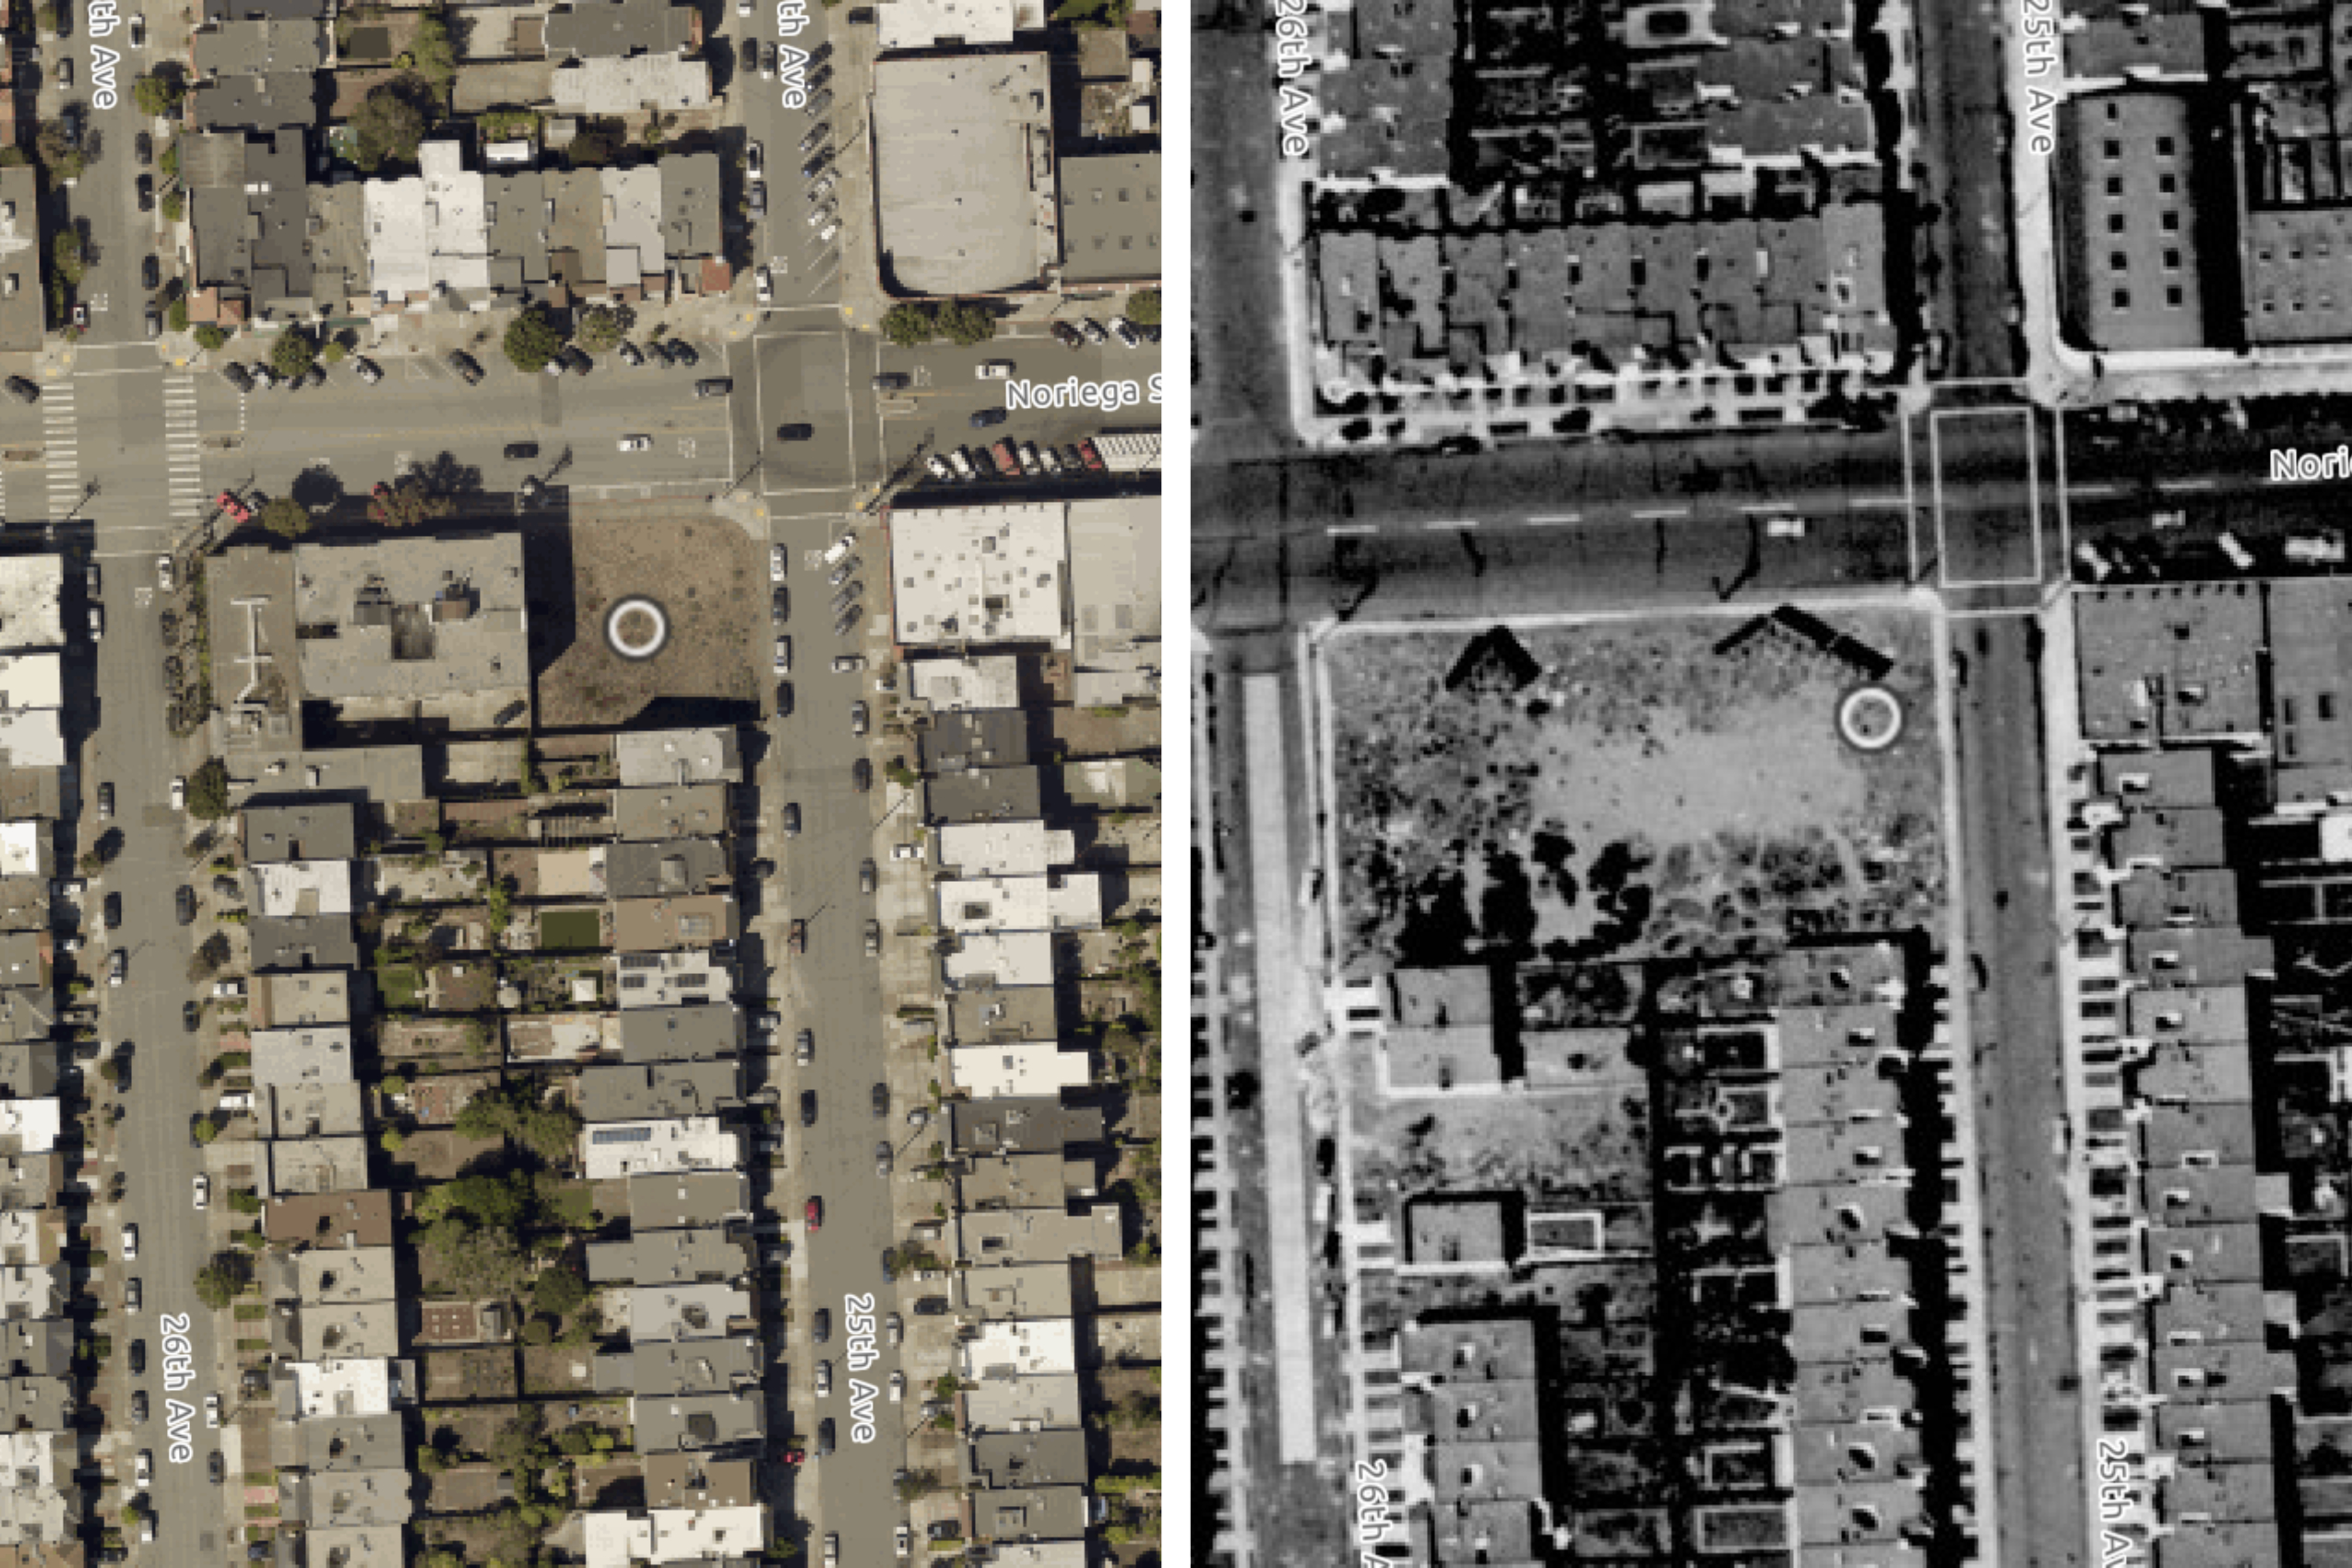 Two photos show an empty lot of land.